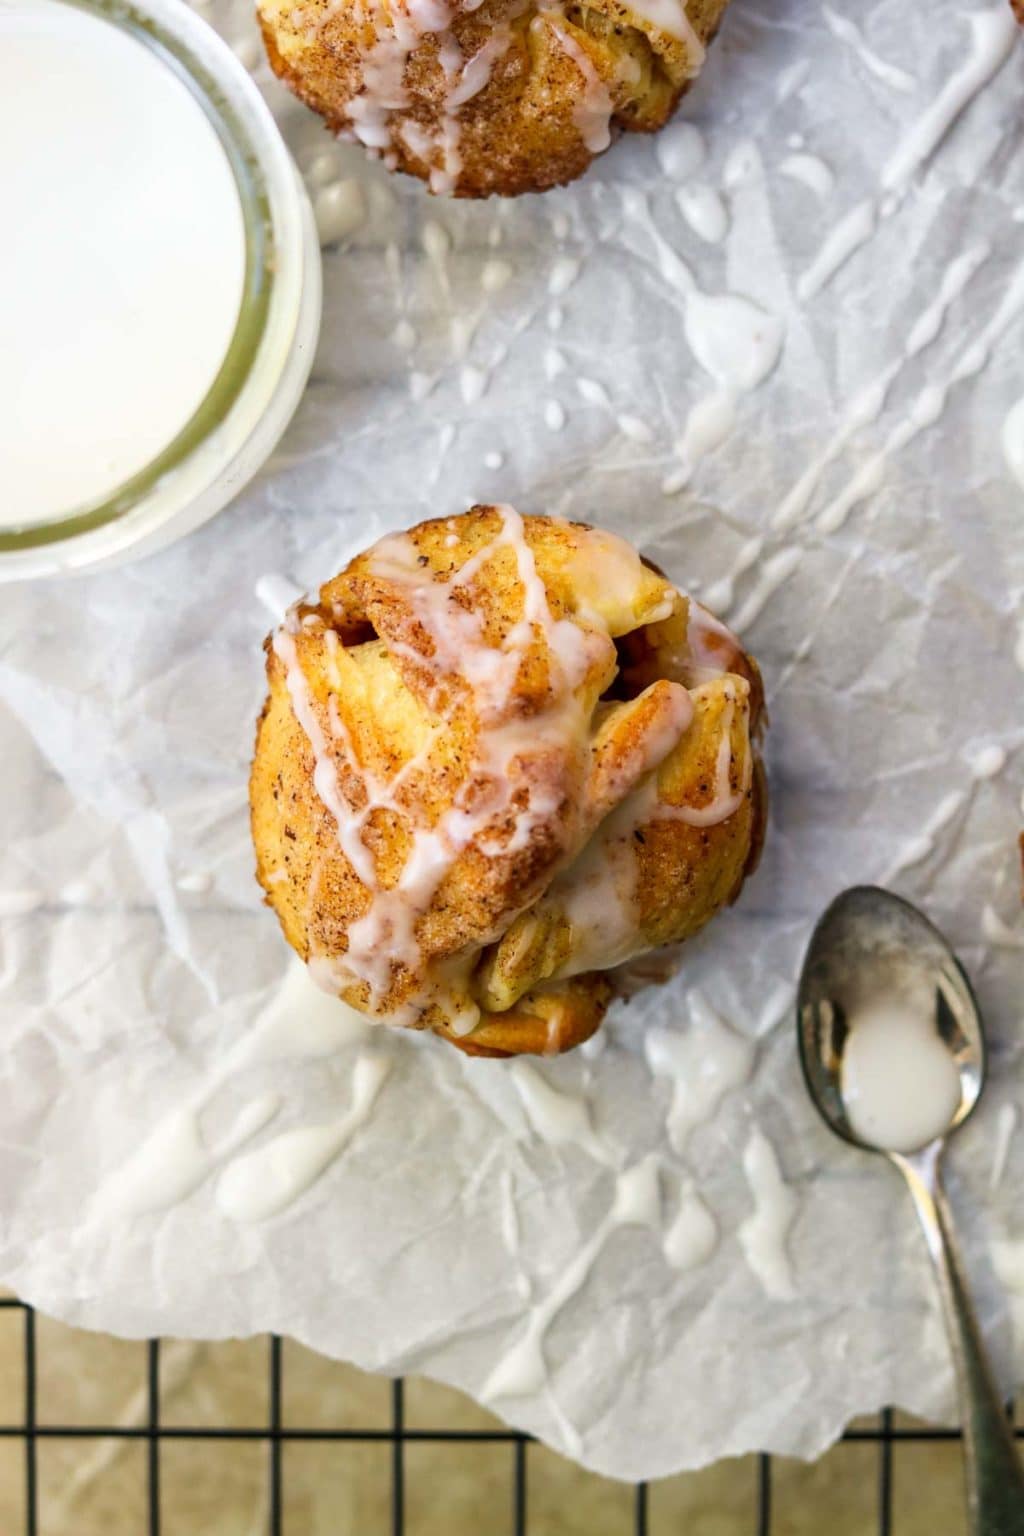 One Cinnamon Bun drizzled with Powder Sugar Glaze and a spoon full of glaze to the side